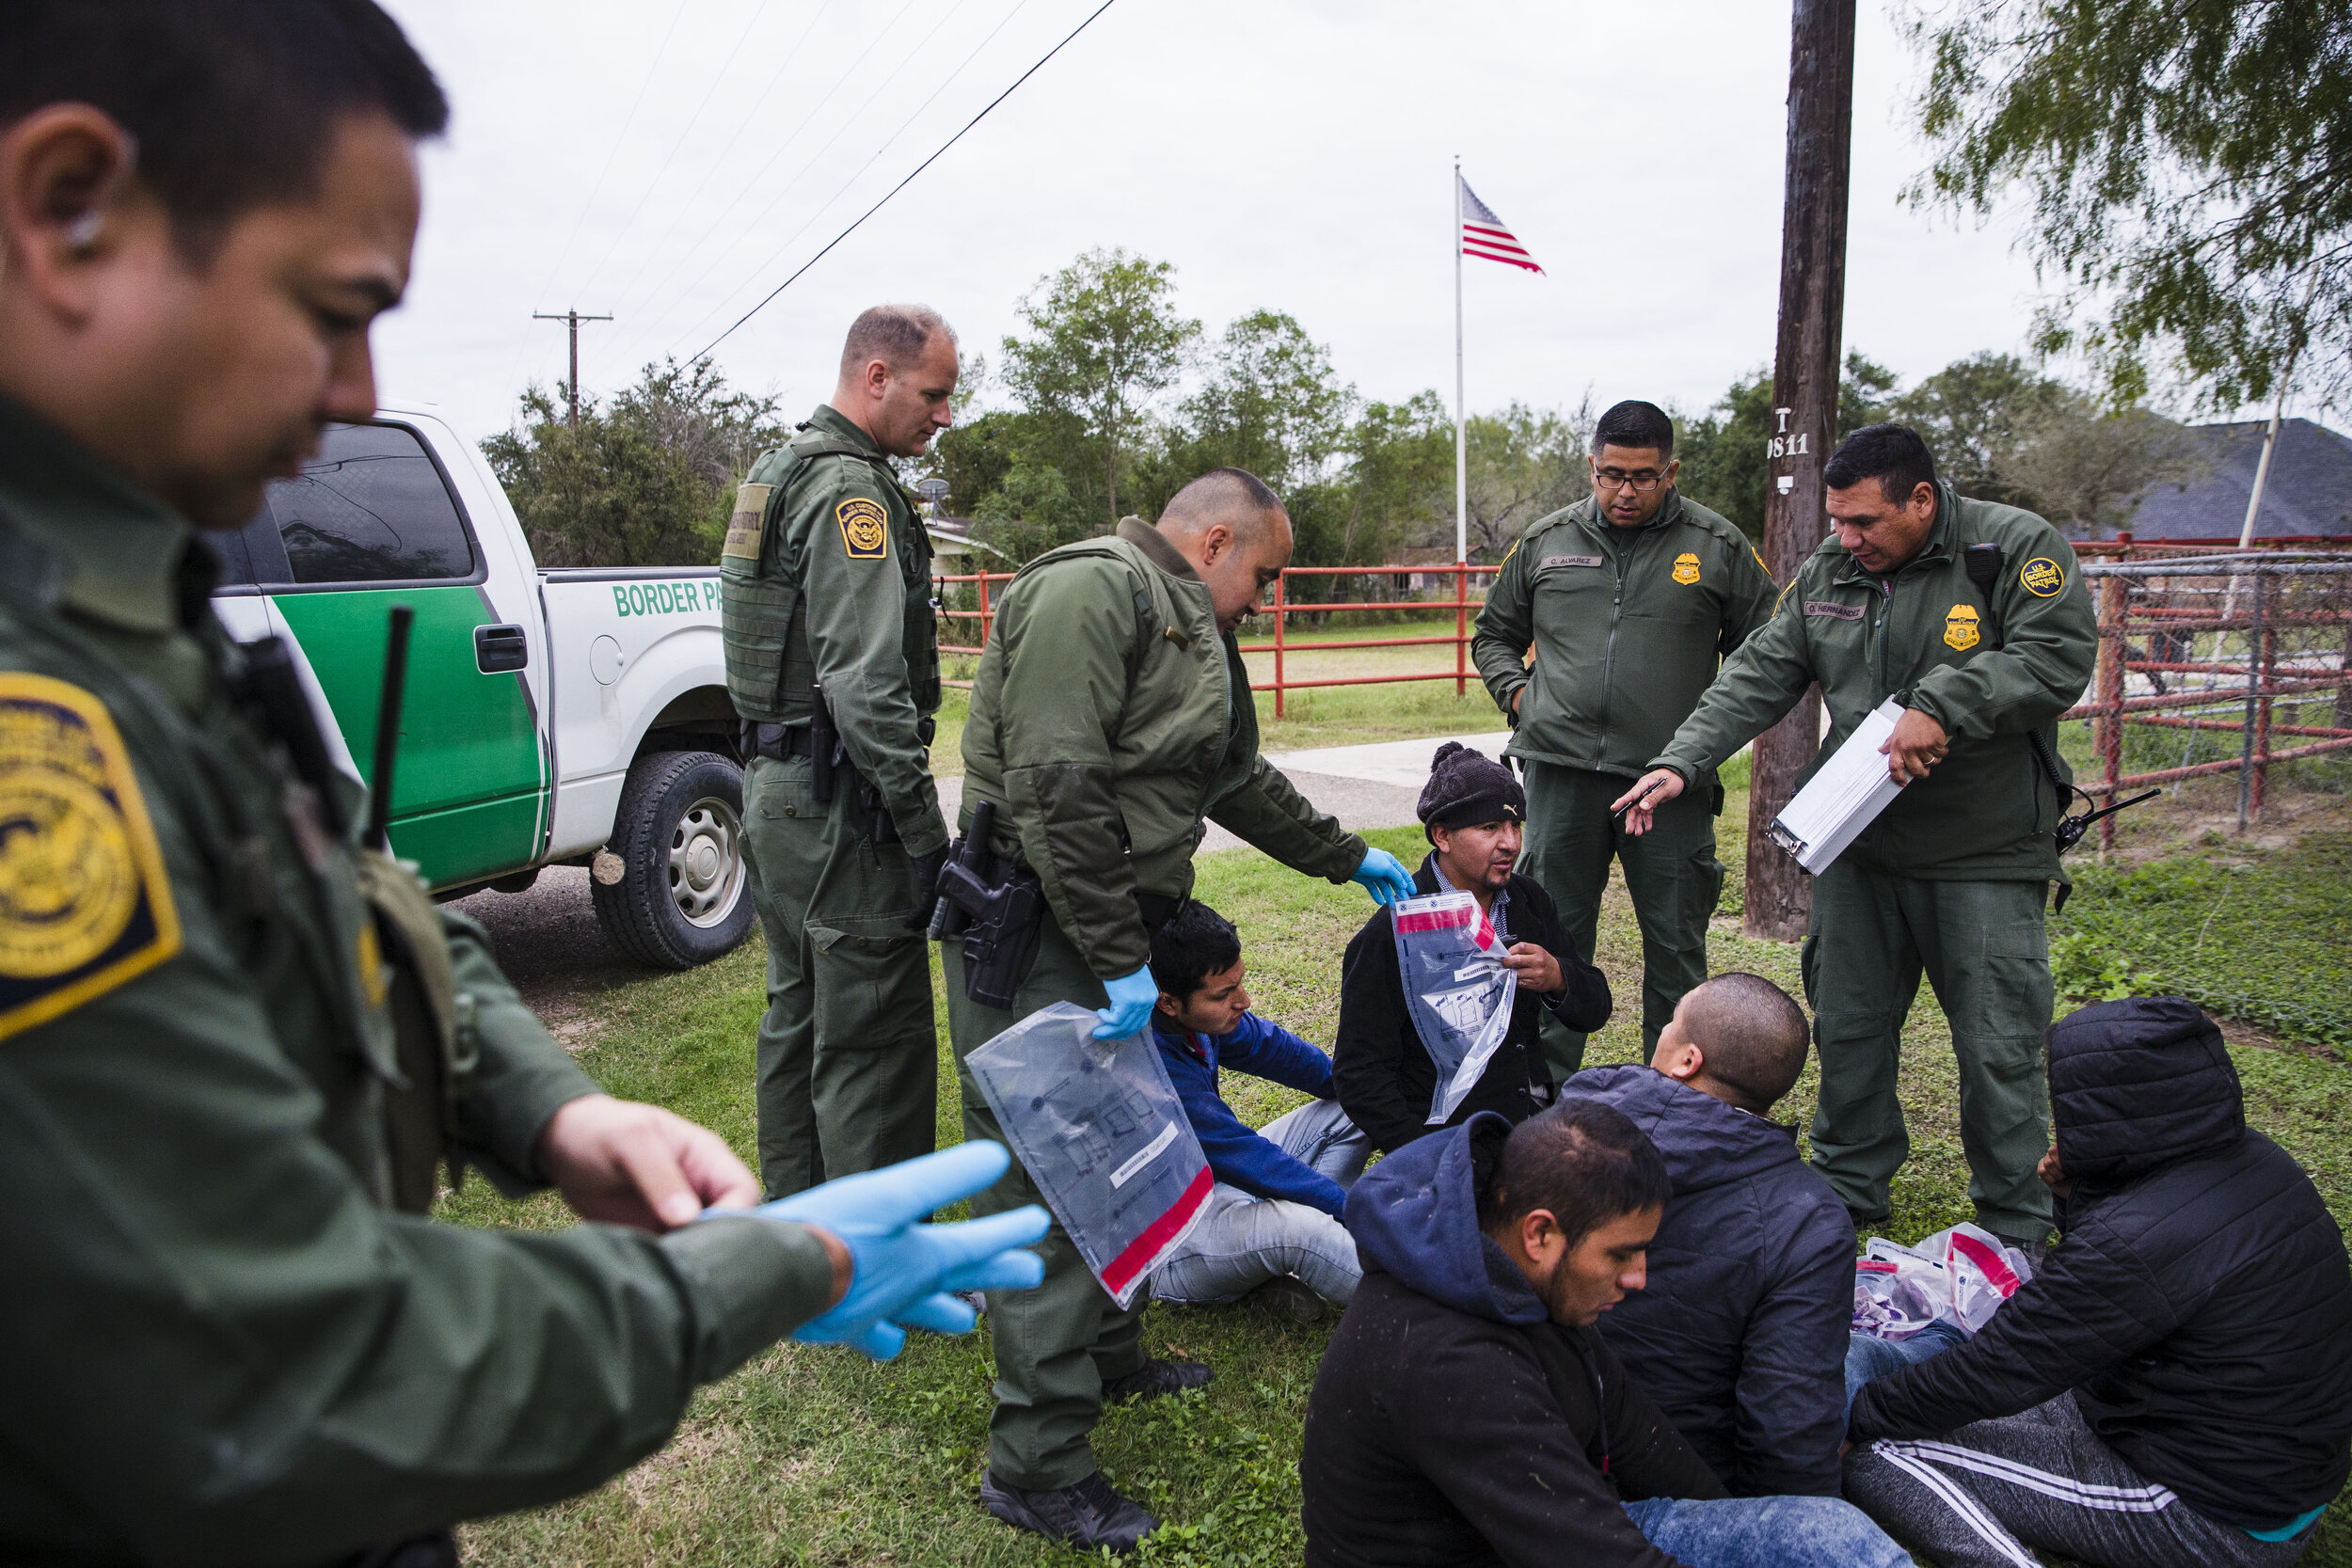  Border Patrol Agents apprehend immigrants who are suspected of illegally crossing the border from Mexico into the United States on Wednesday, Dec. 5, 2018, near McAllen, TX. 